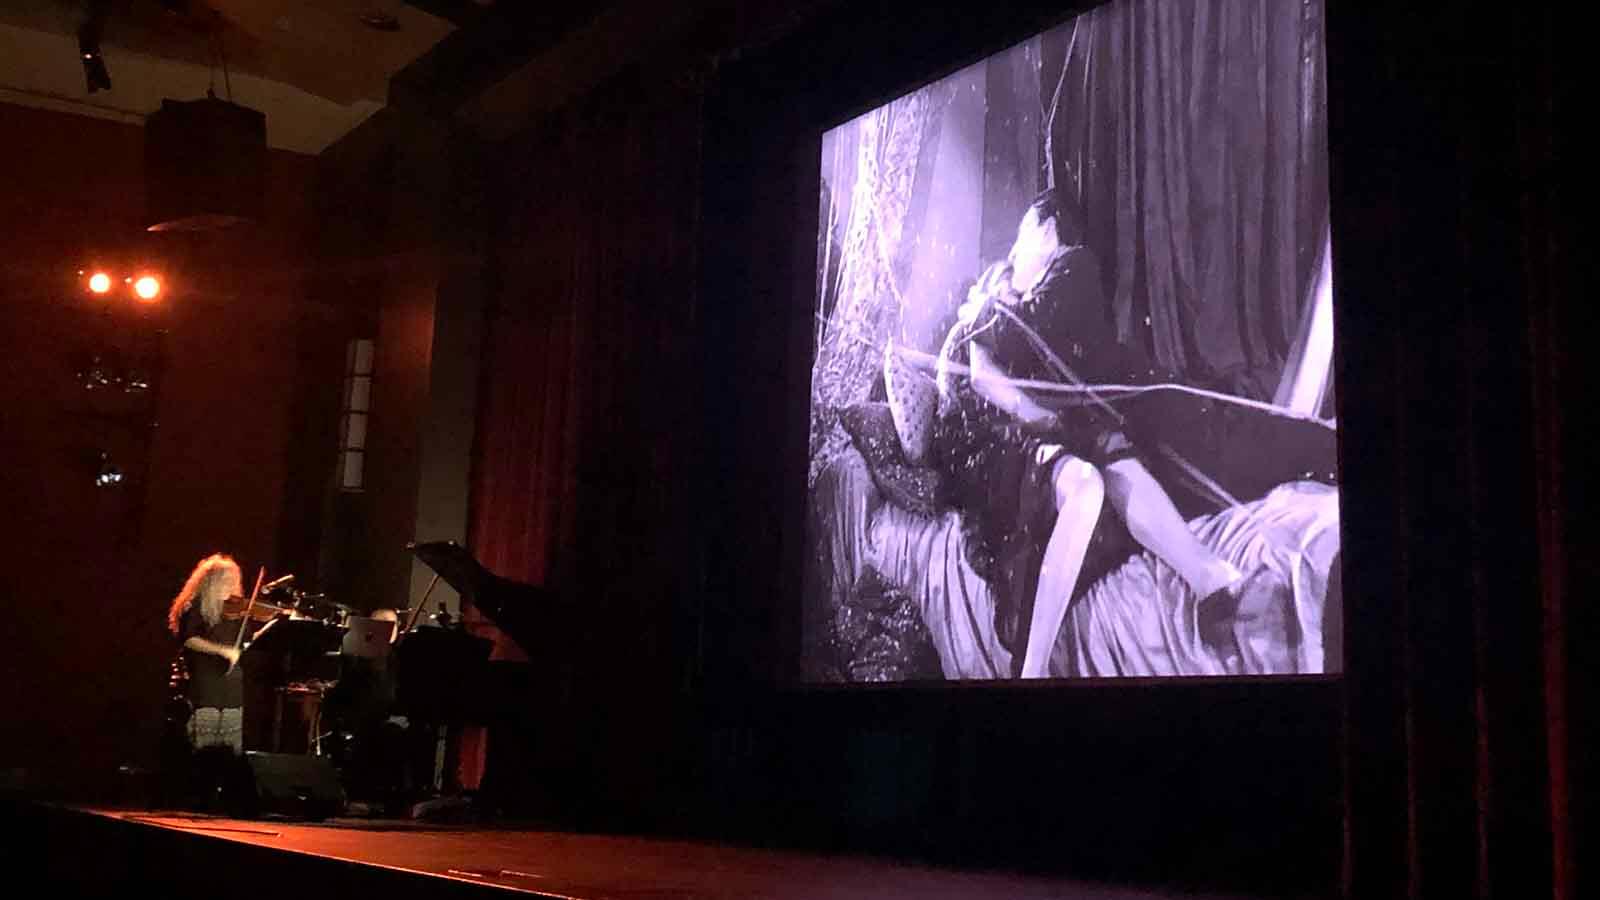 Violinist on lower left stage with film on large screen on right